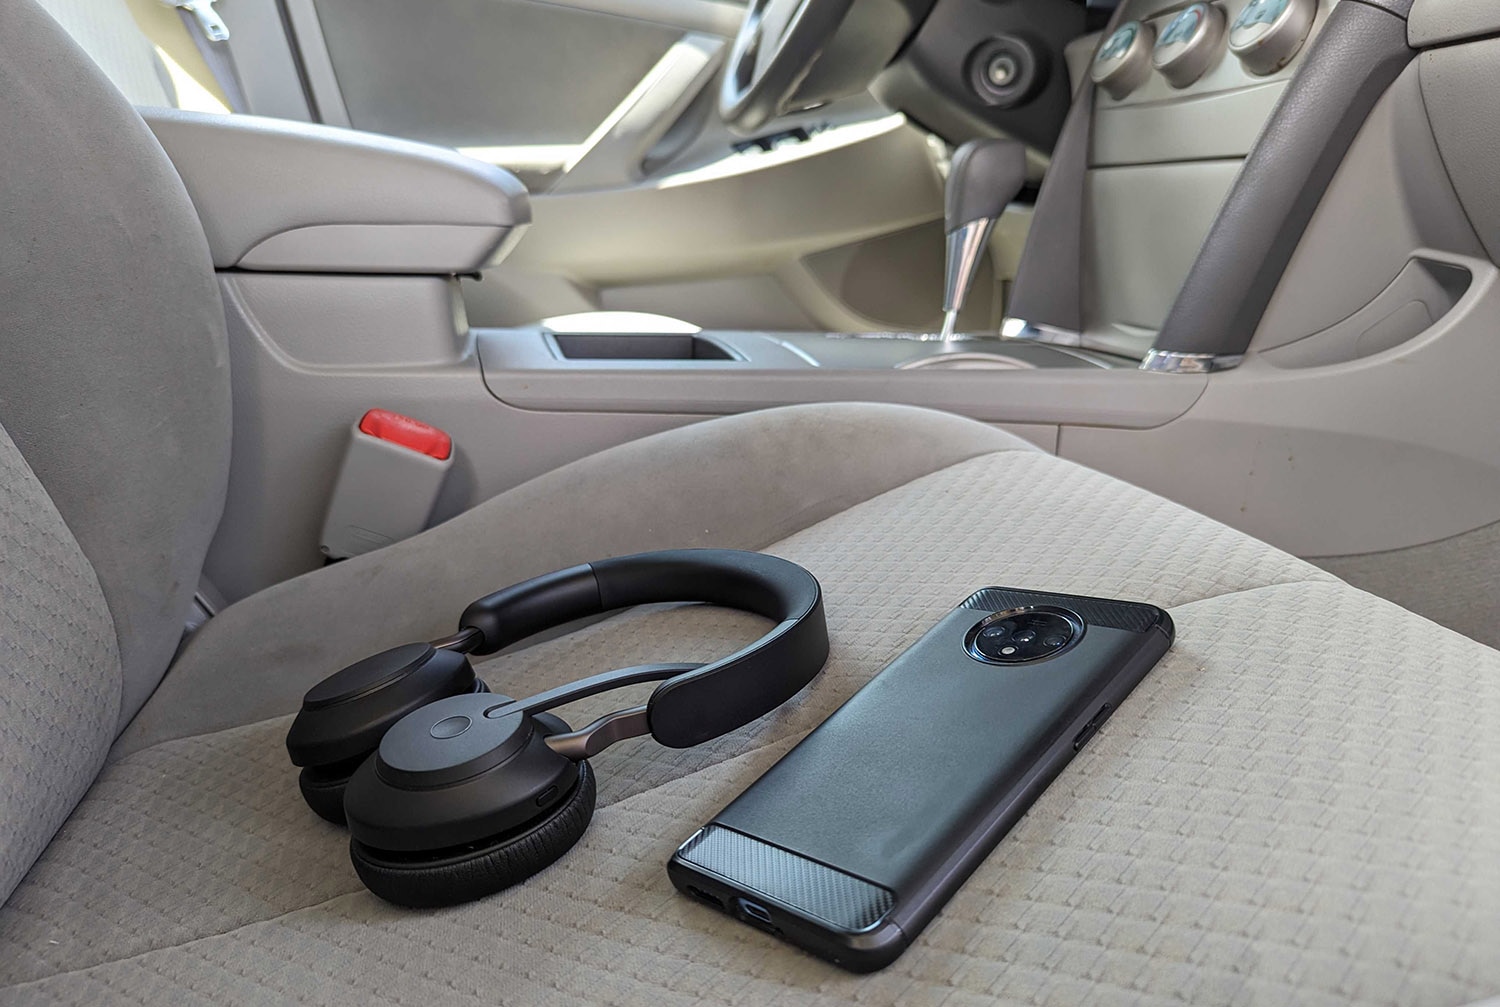 A cell phone and headphones lie on the passenger seat of a vehicle in plain view.